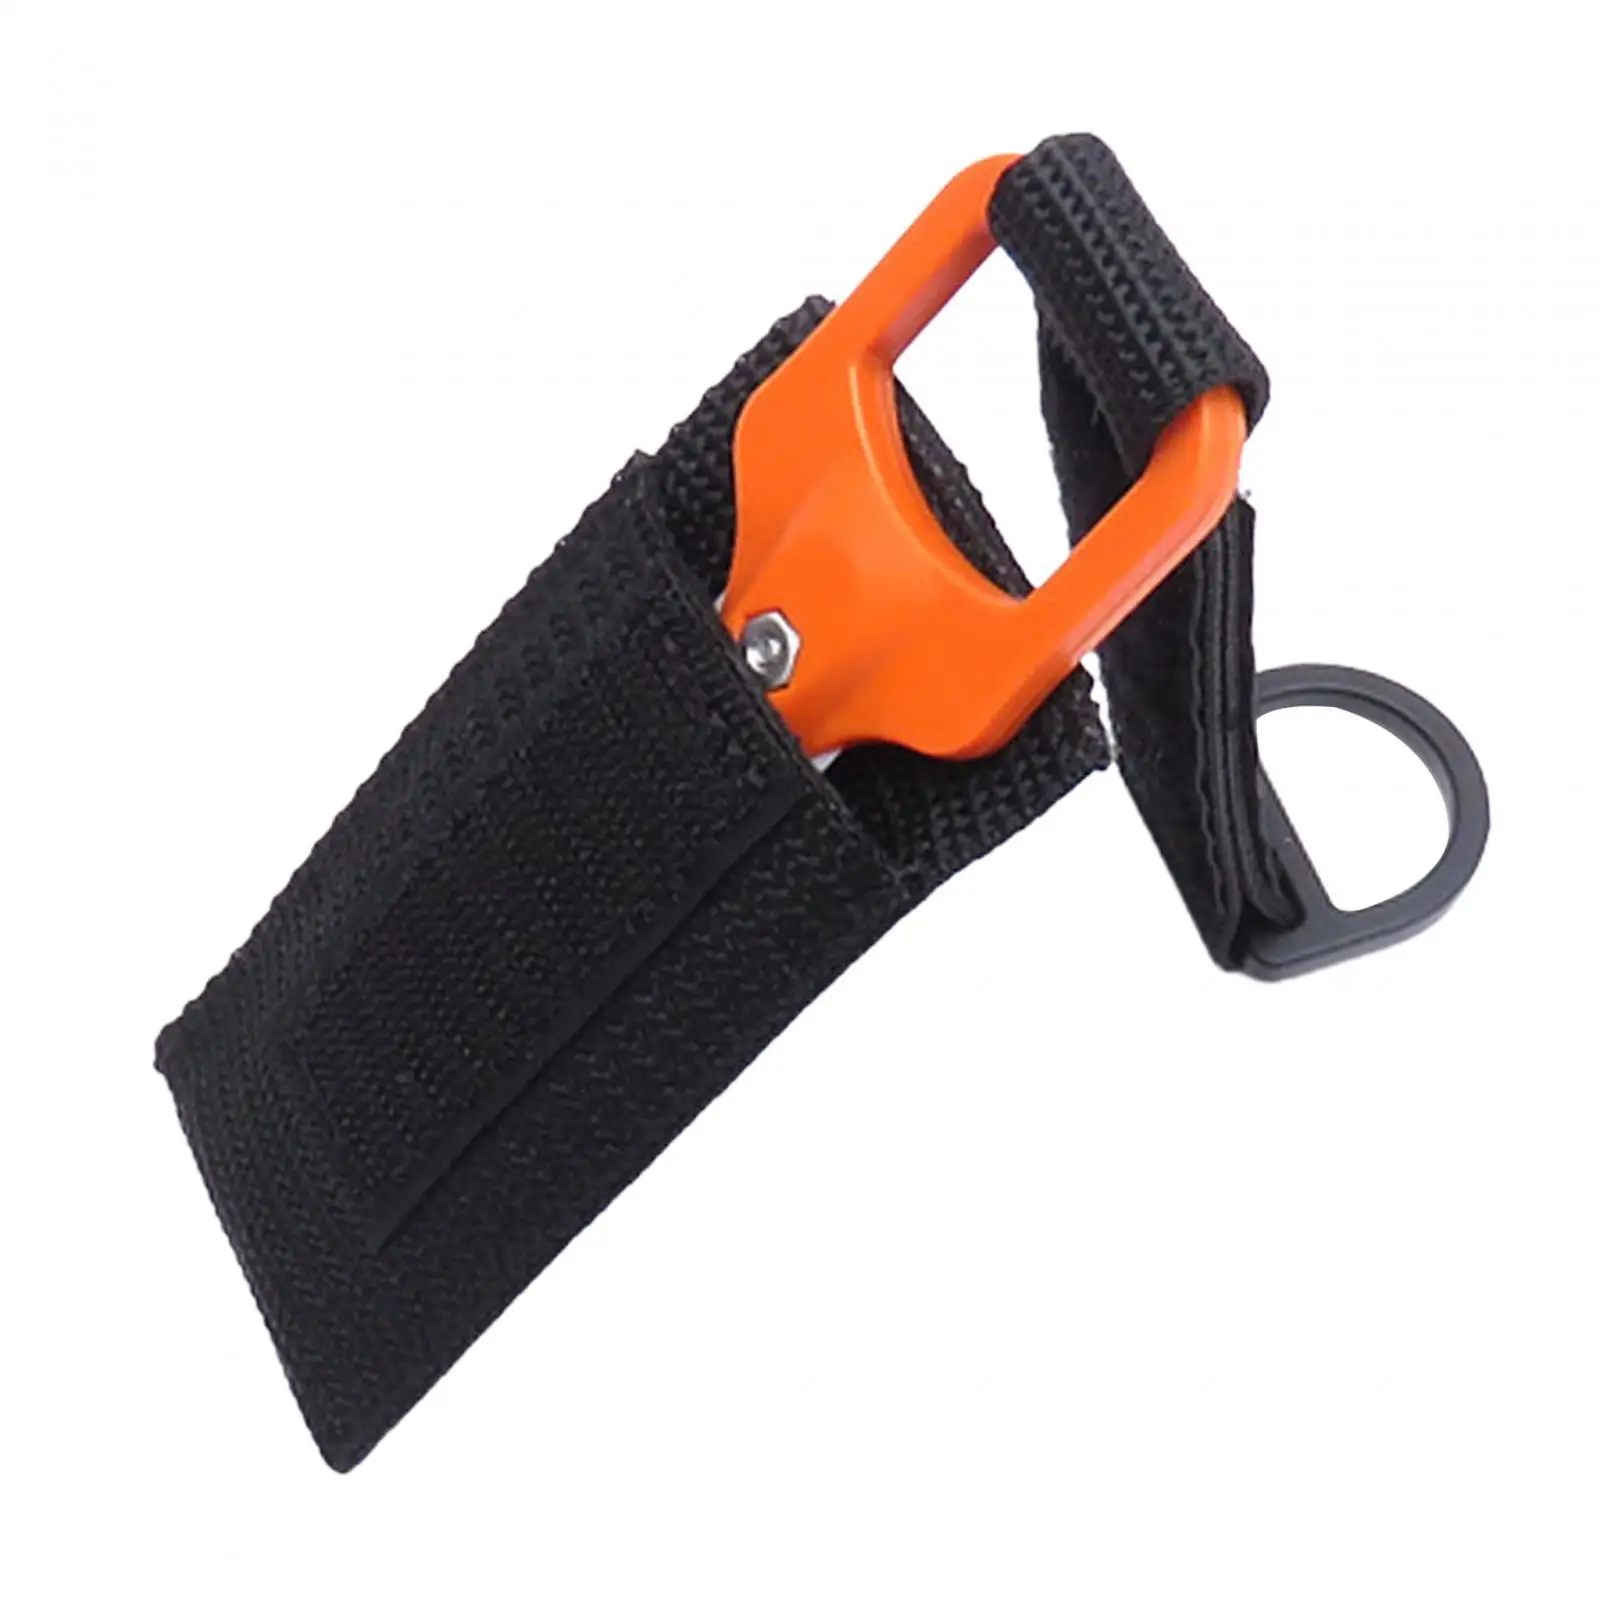 Scuba Diving Line Cutter Cutting Tool for Freediving Swimming Water Sports